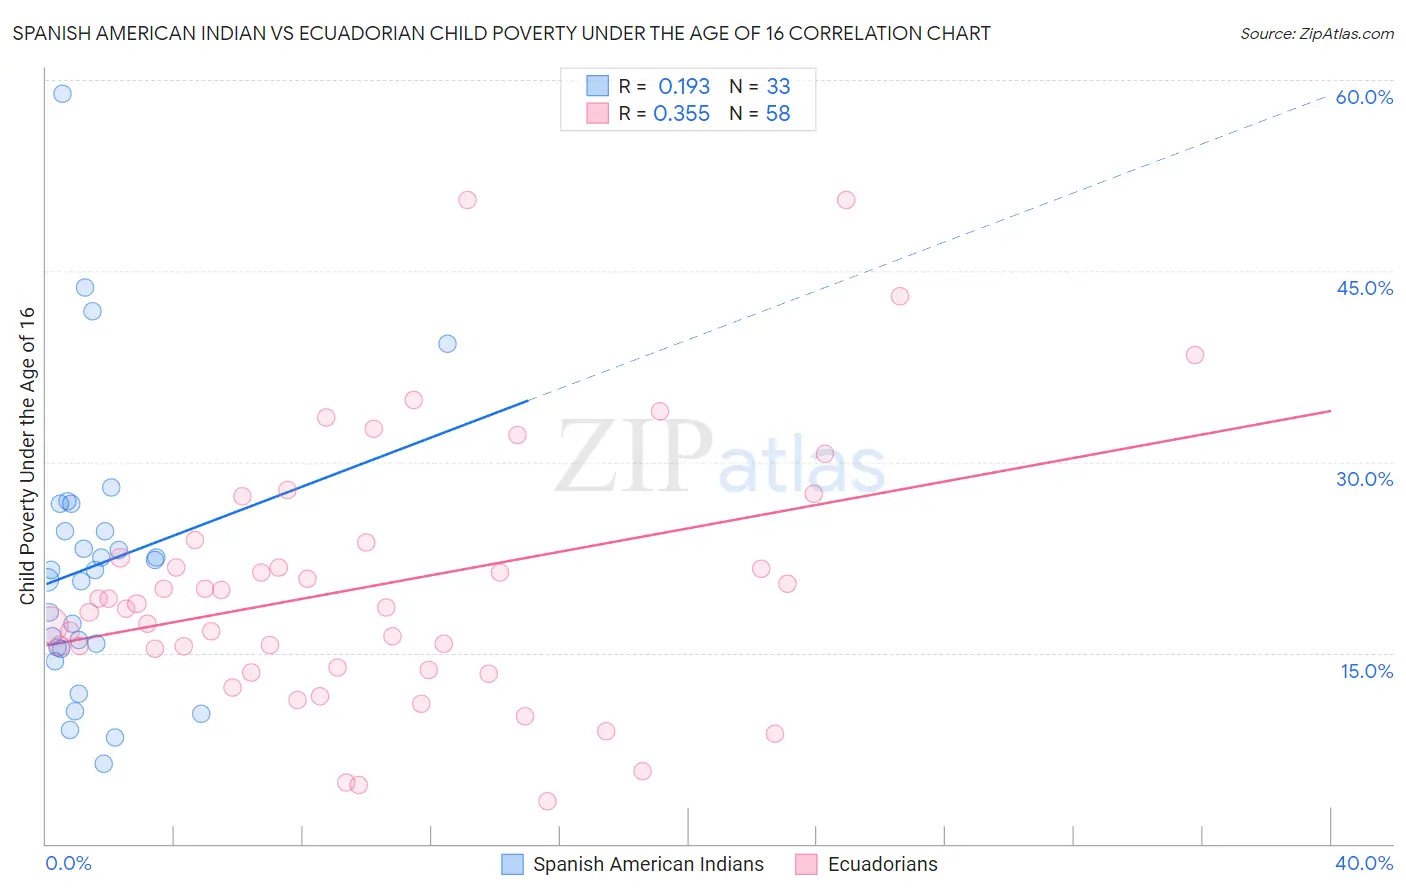 Spanish American Indian vs Ecuadorian Child Poverty Under the Age of 16